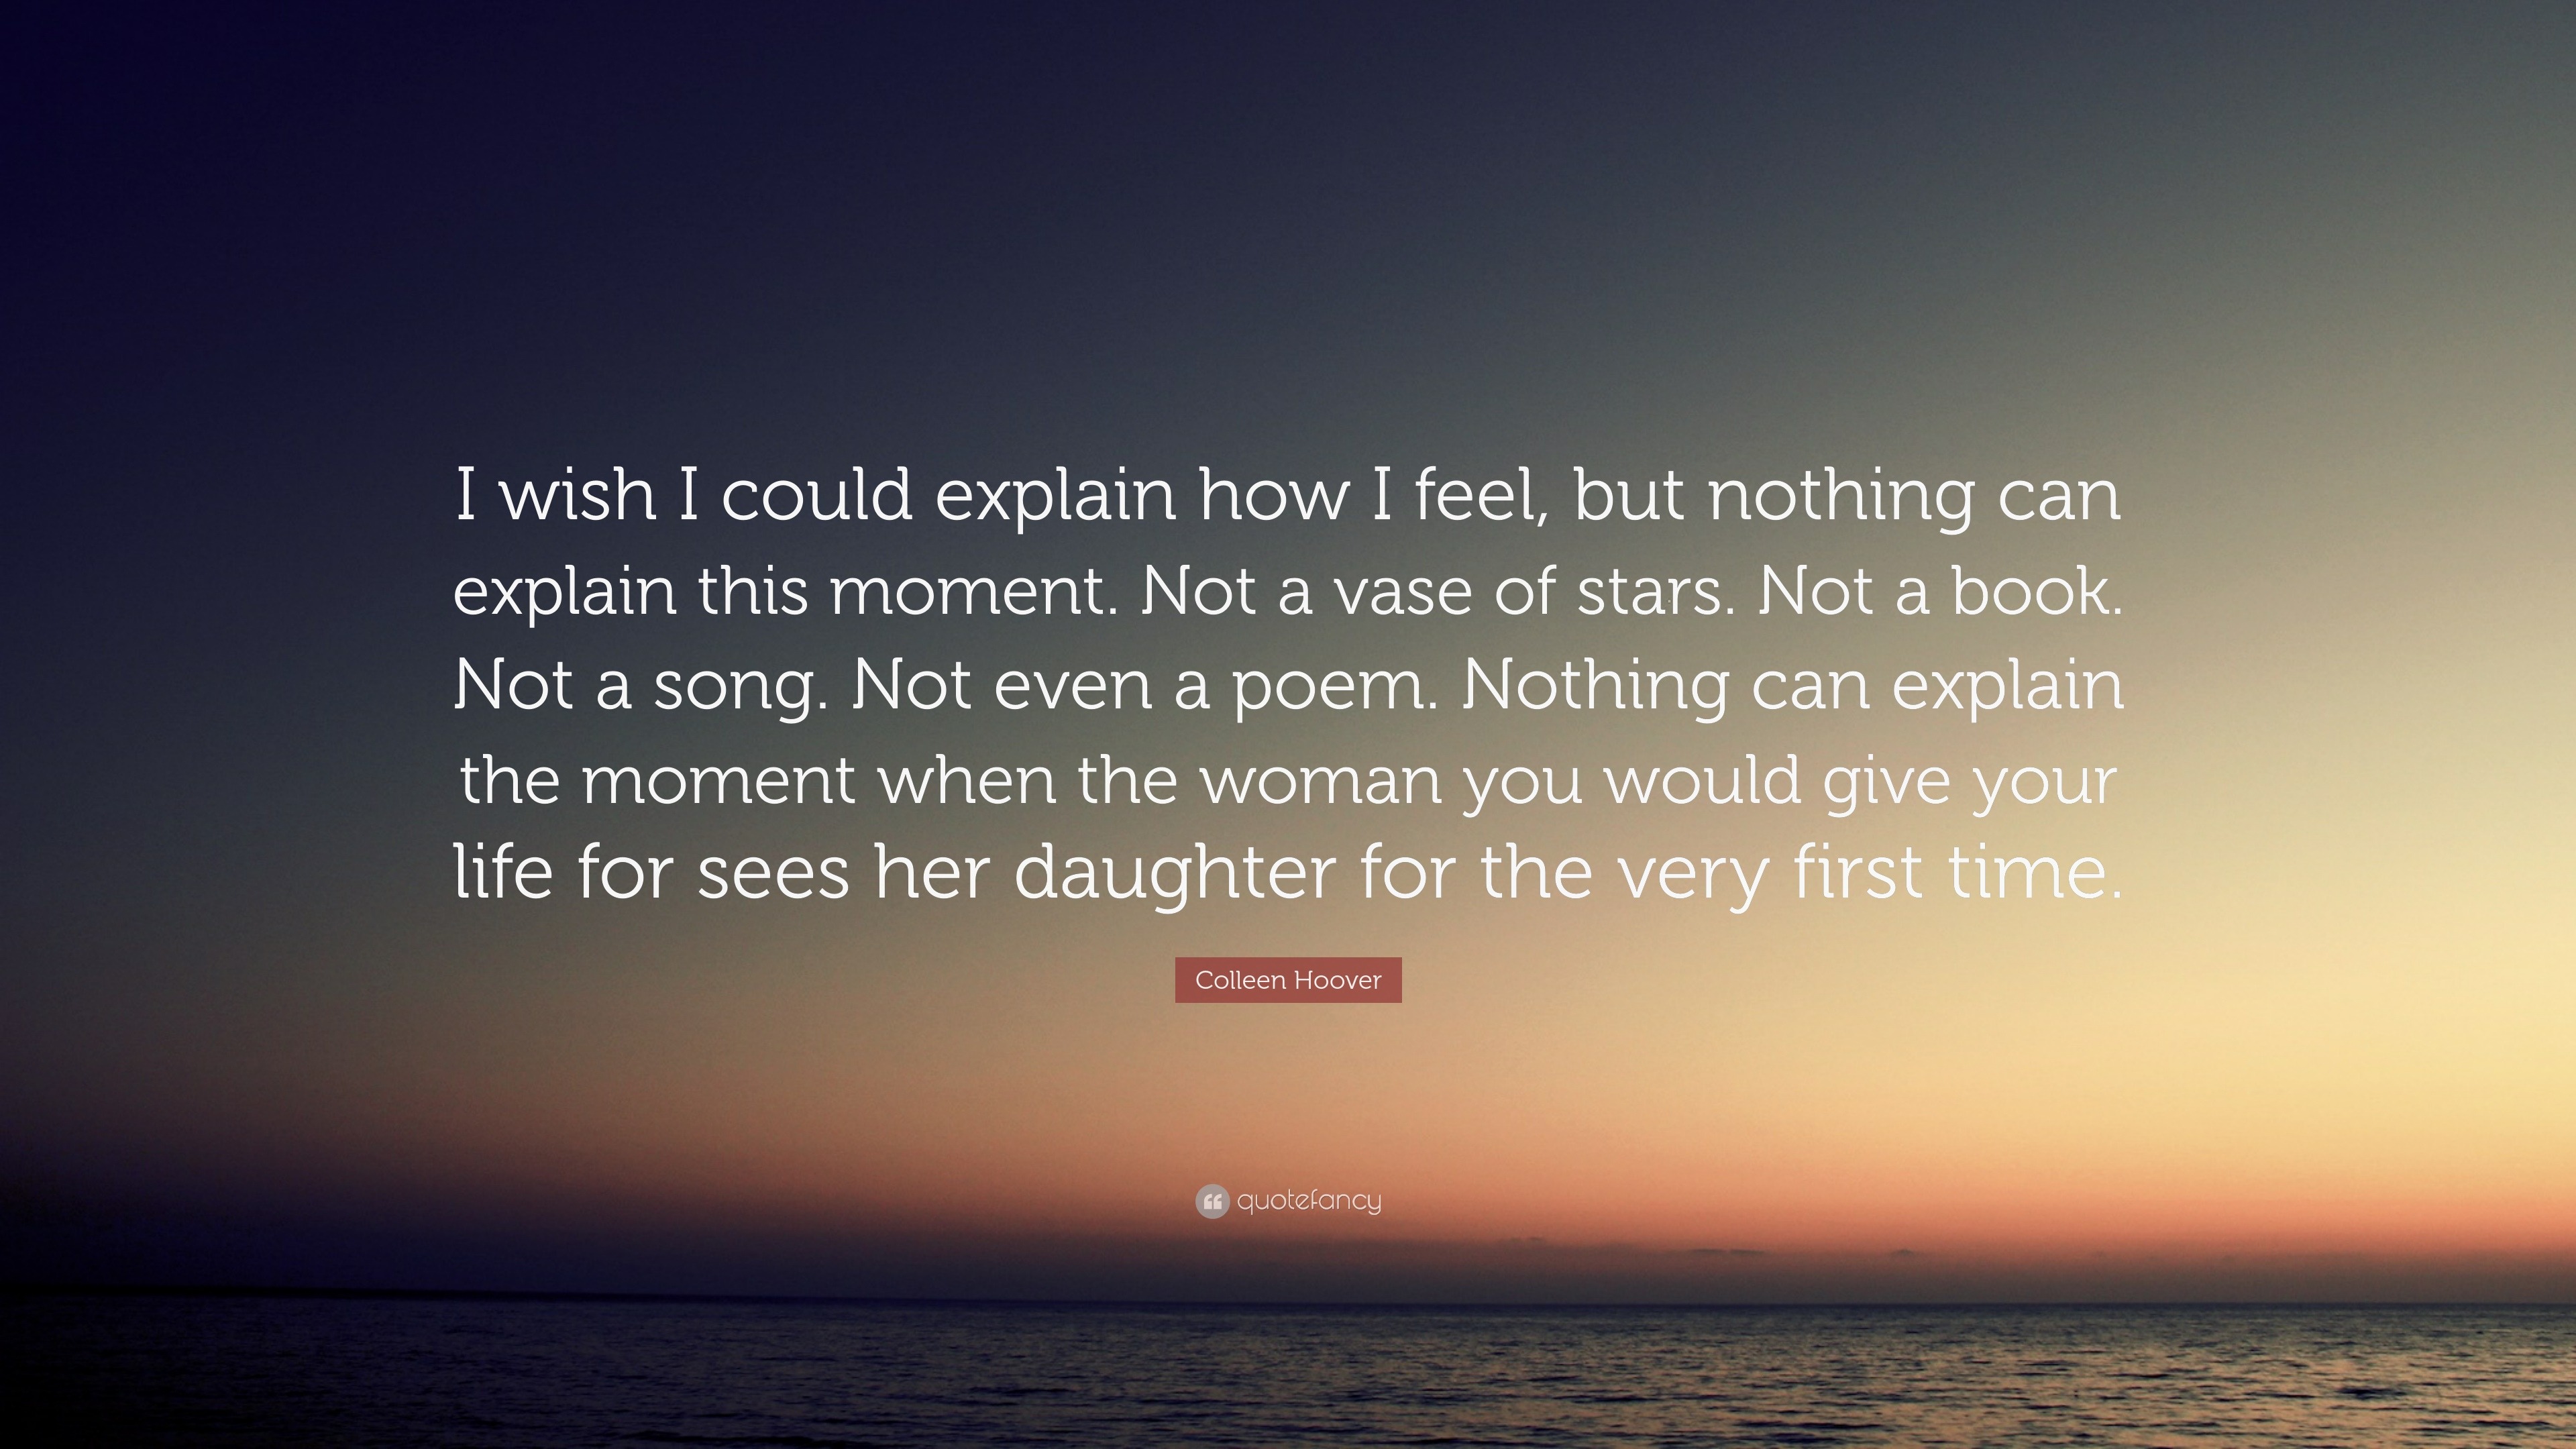 Colleen Hoover Quote “I wish I could explain how I feel but nothing